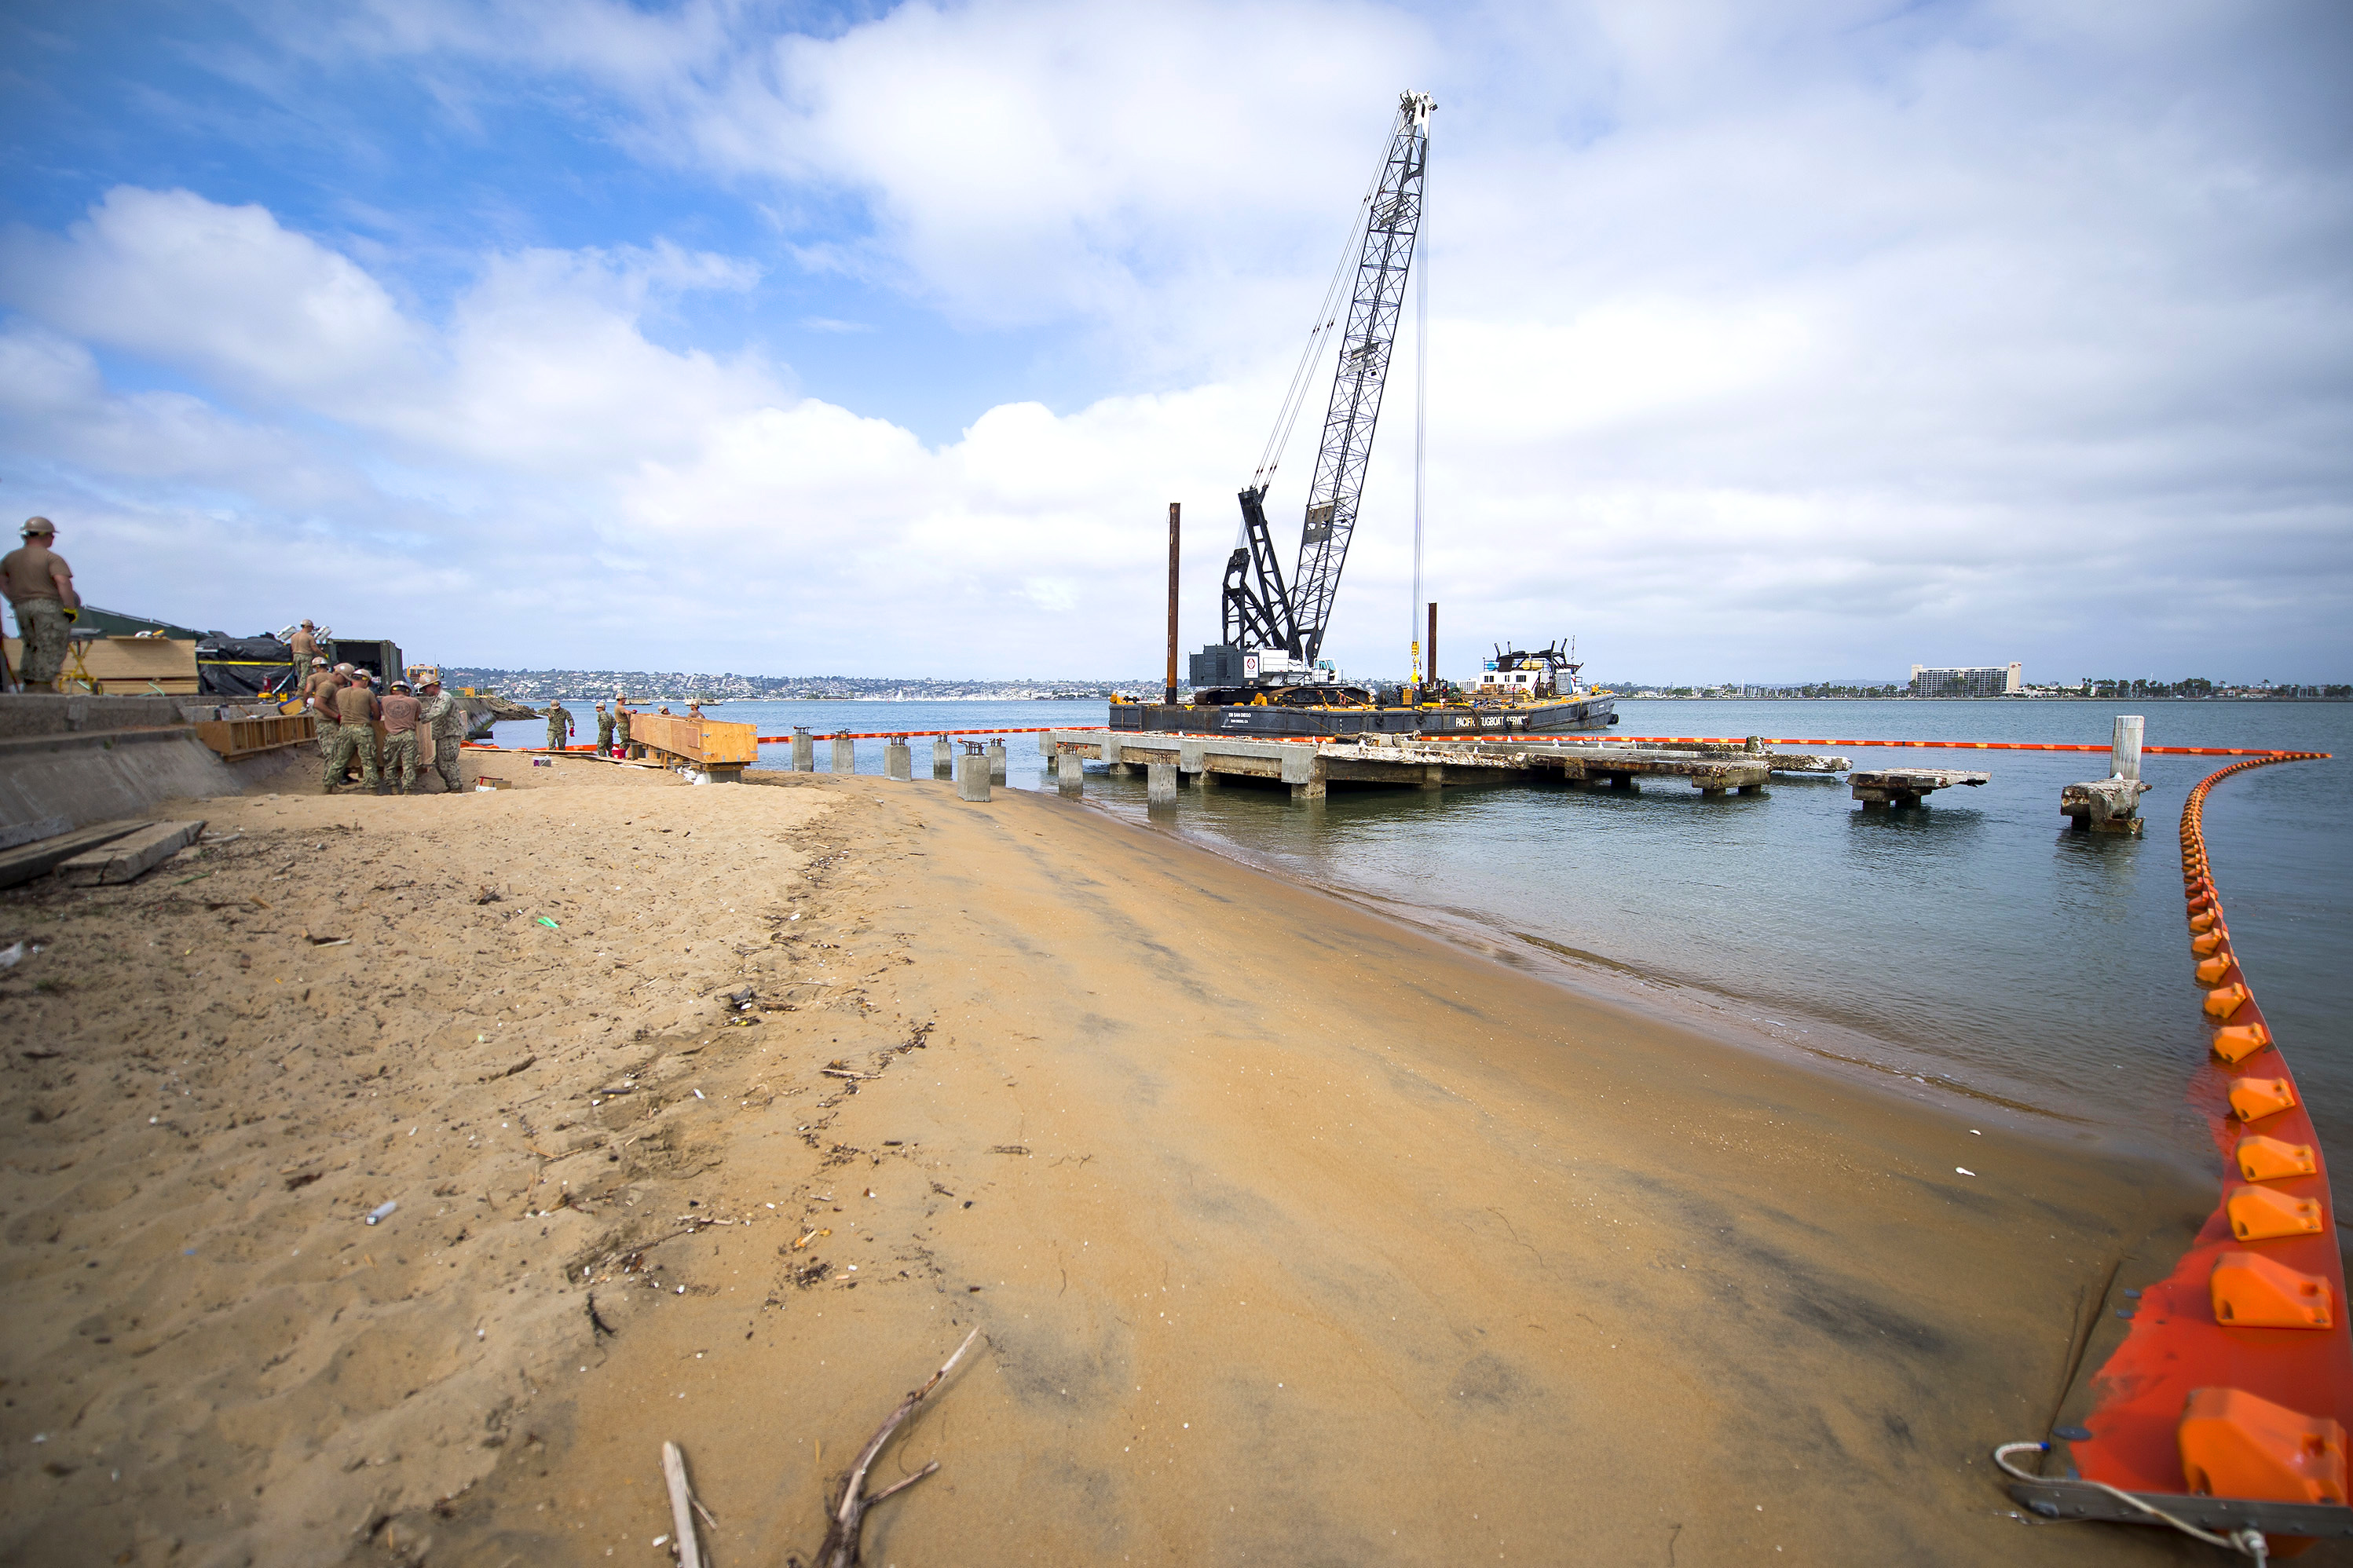 Navy Seabees Reconstruct A Historic Seaplane Ramp At Naval Air Station